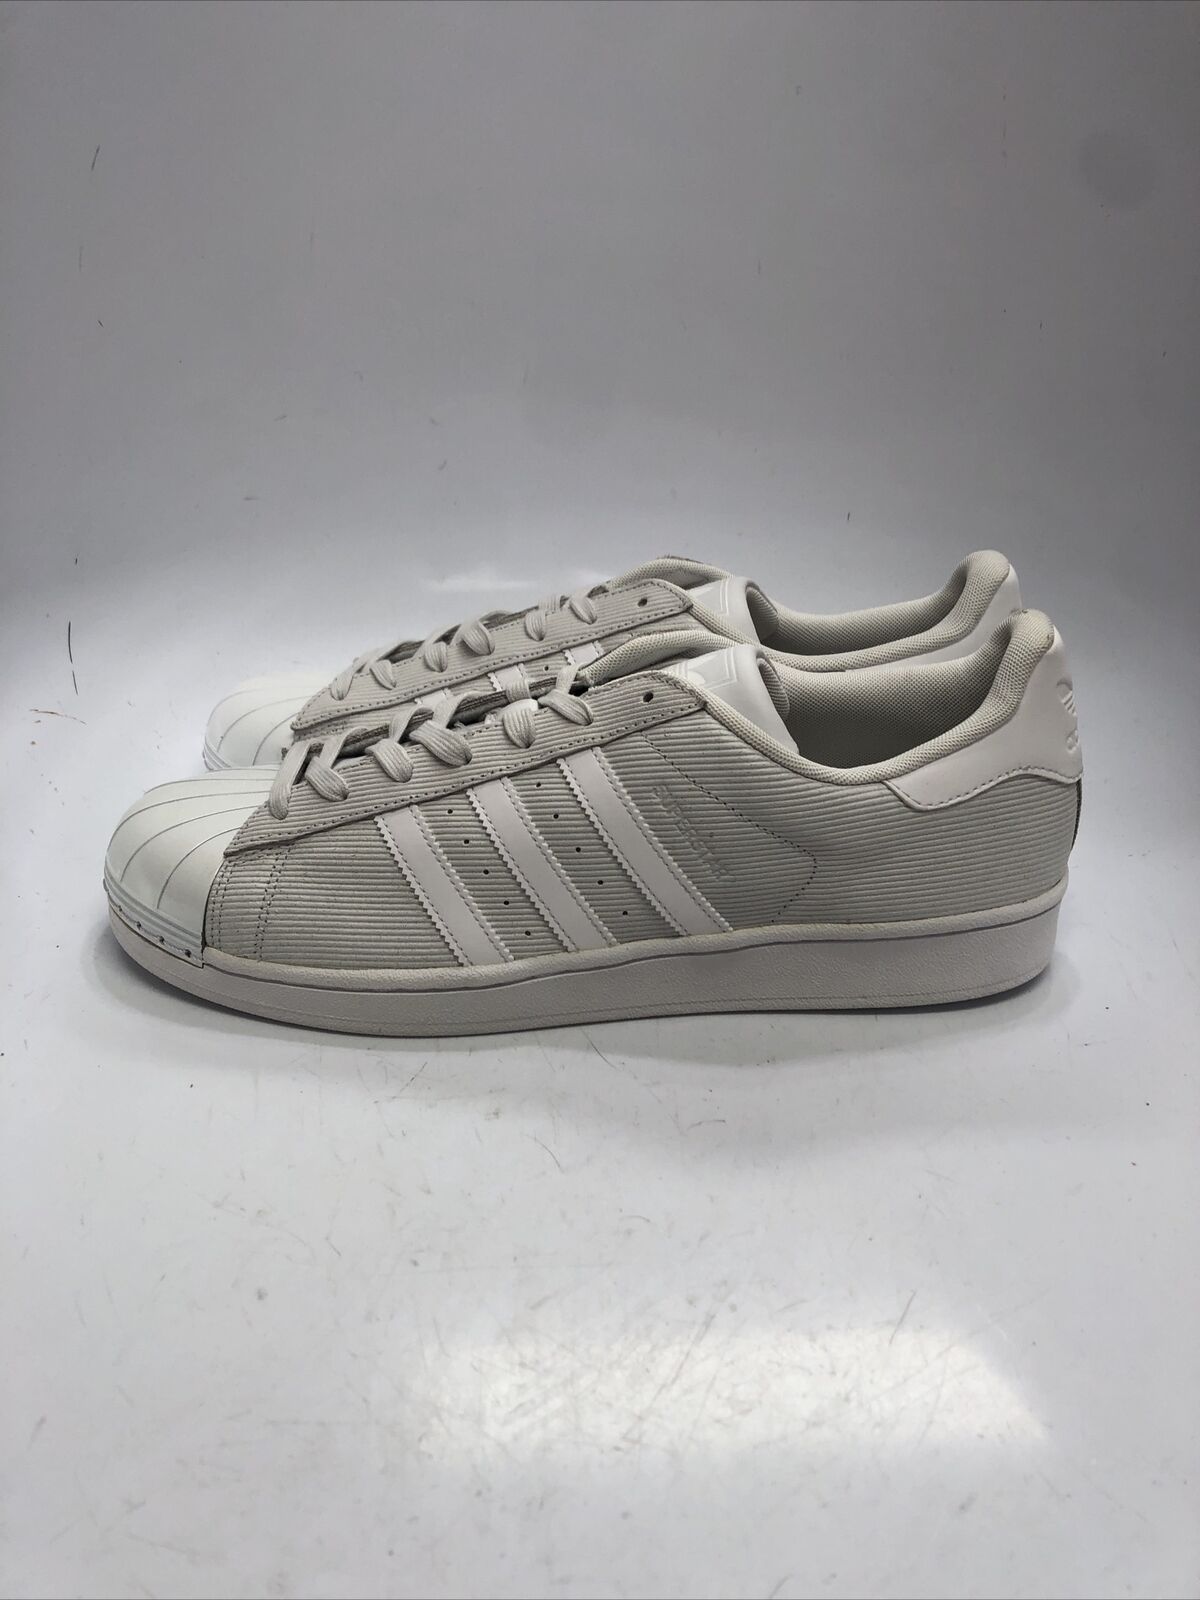 Adidas Superstar Cloud White [BY3174] Men Sneakers Size 13 OB802 